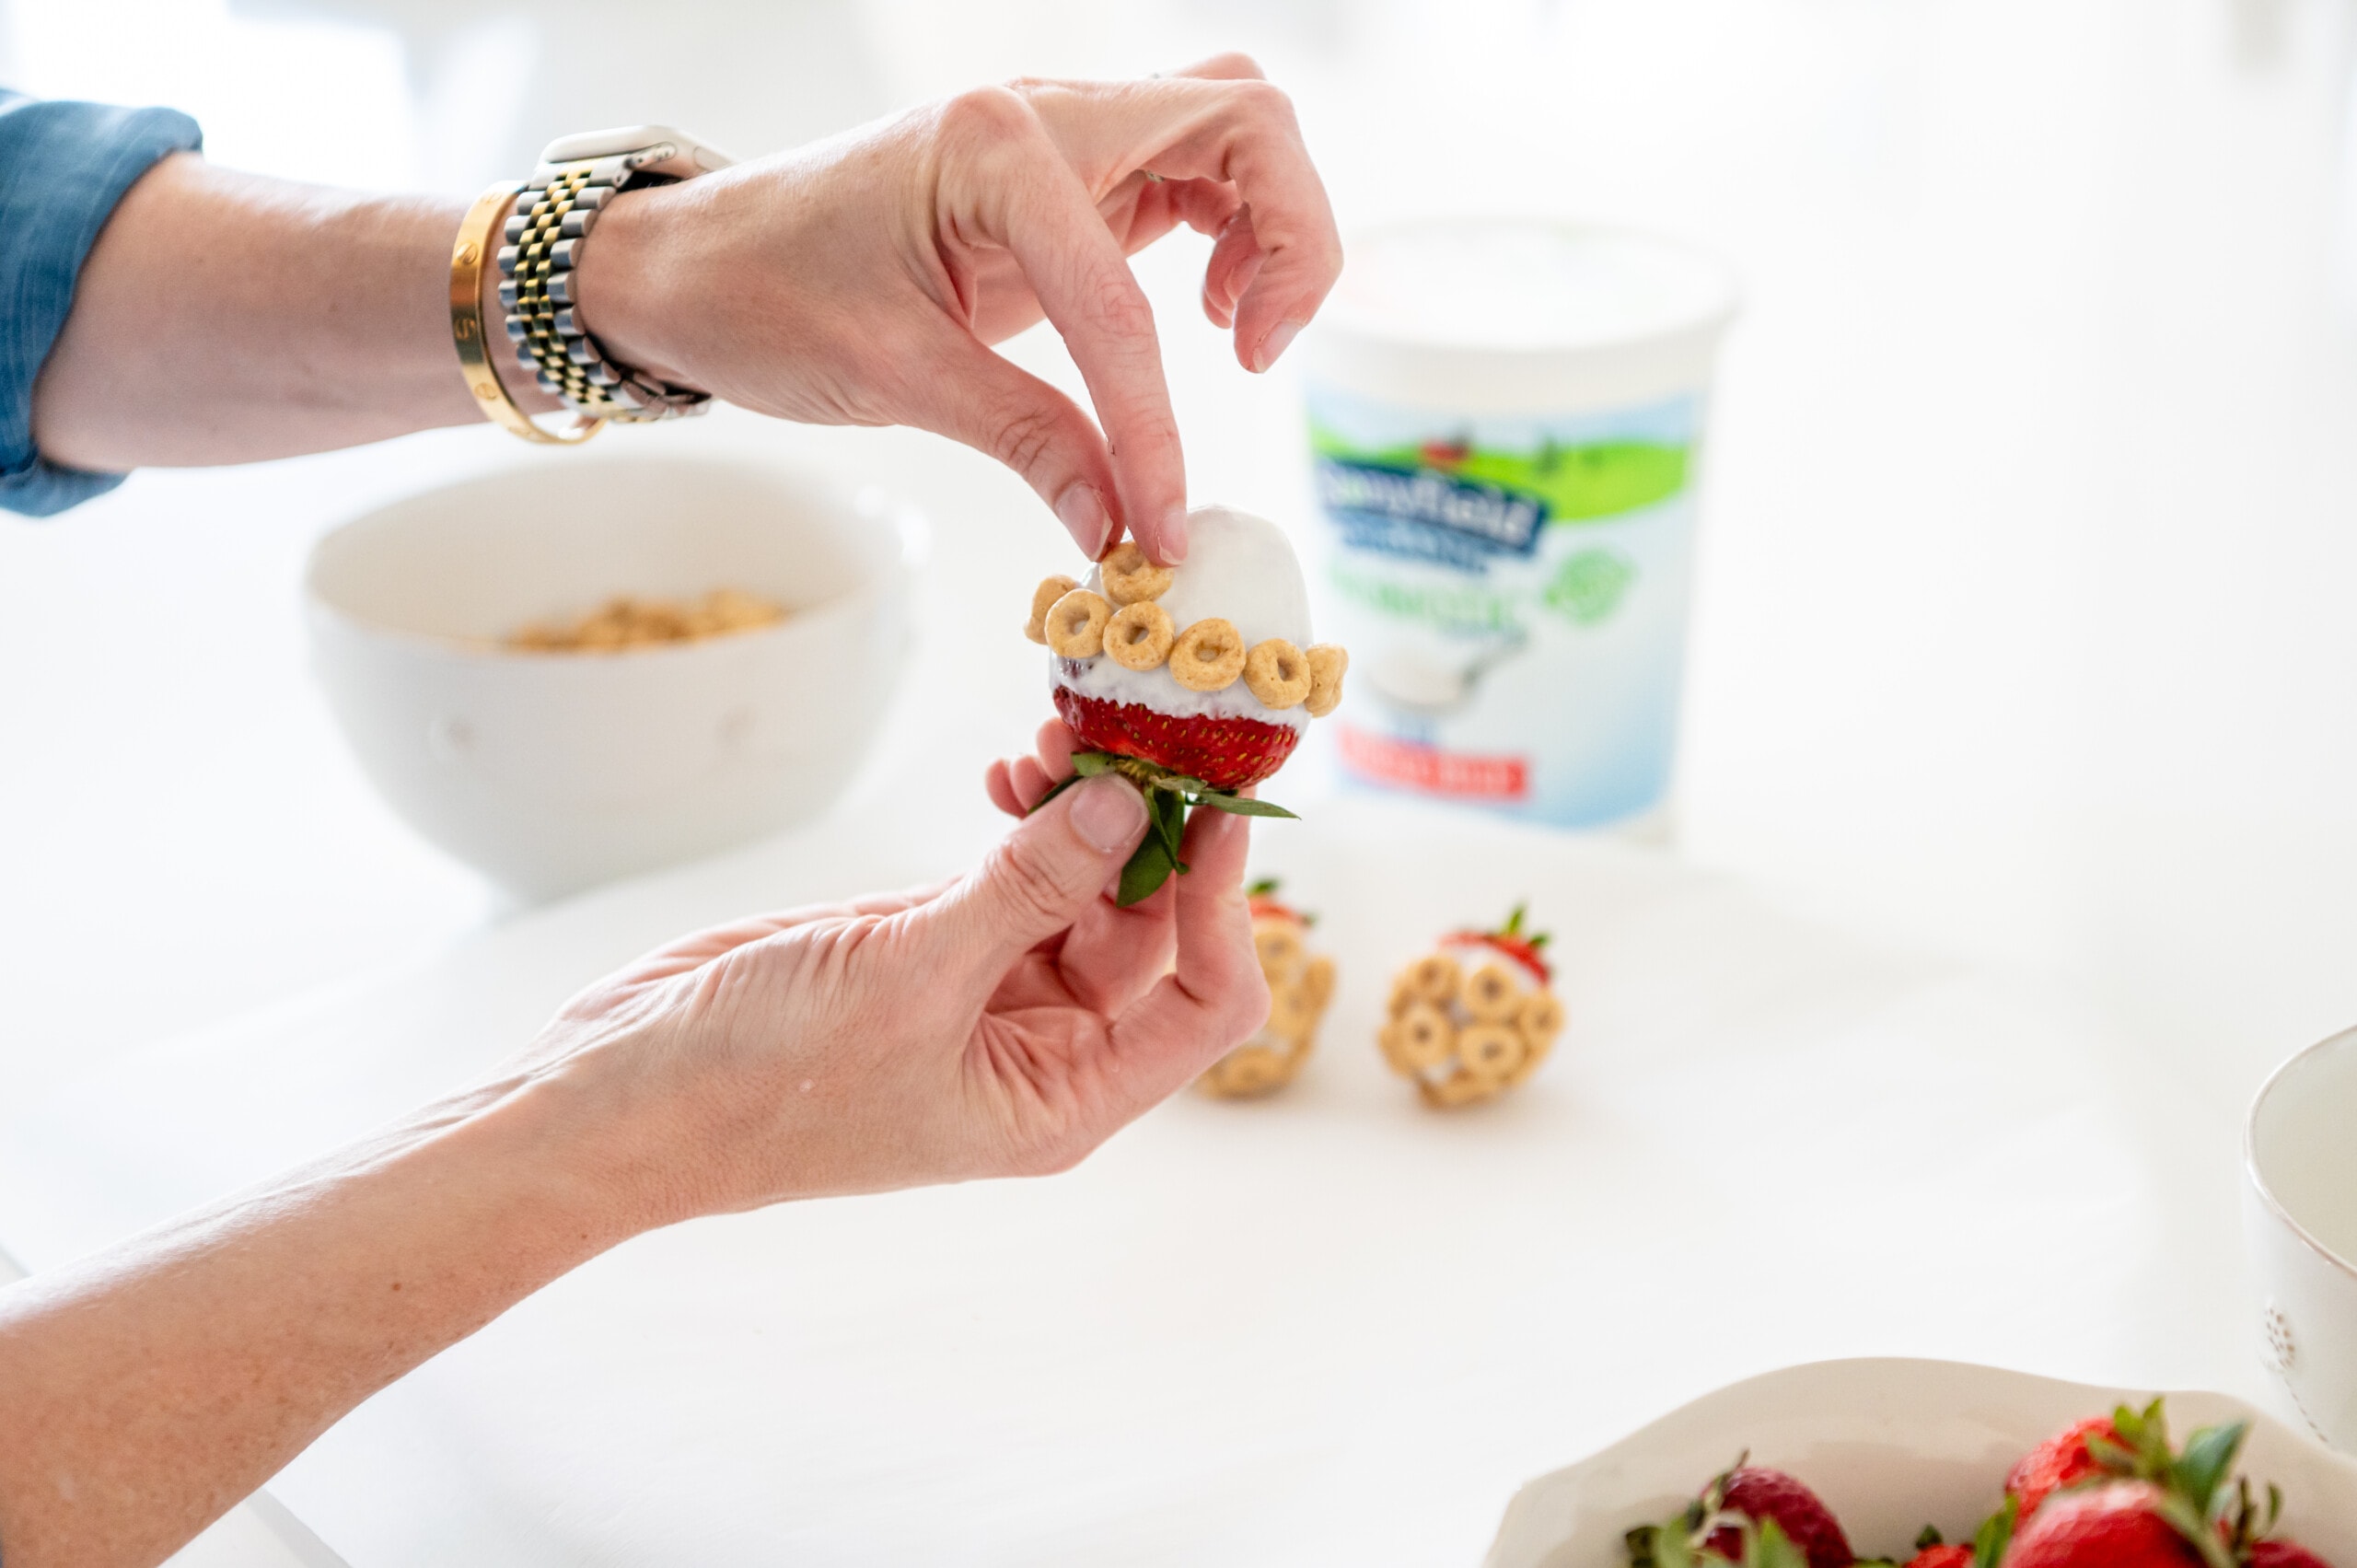 Hands carefully putting cheerios on the yogurt covered strawberry.